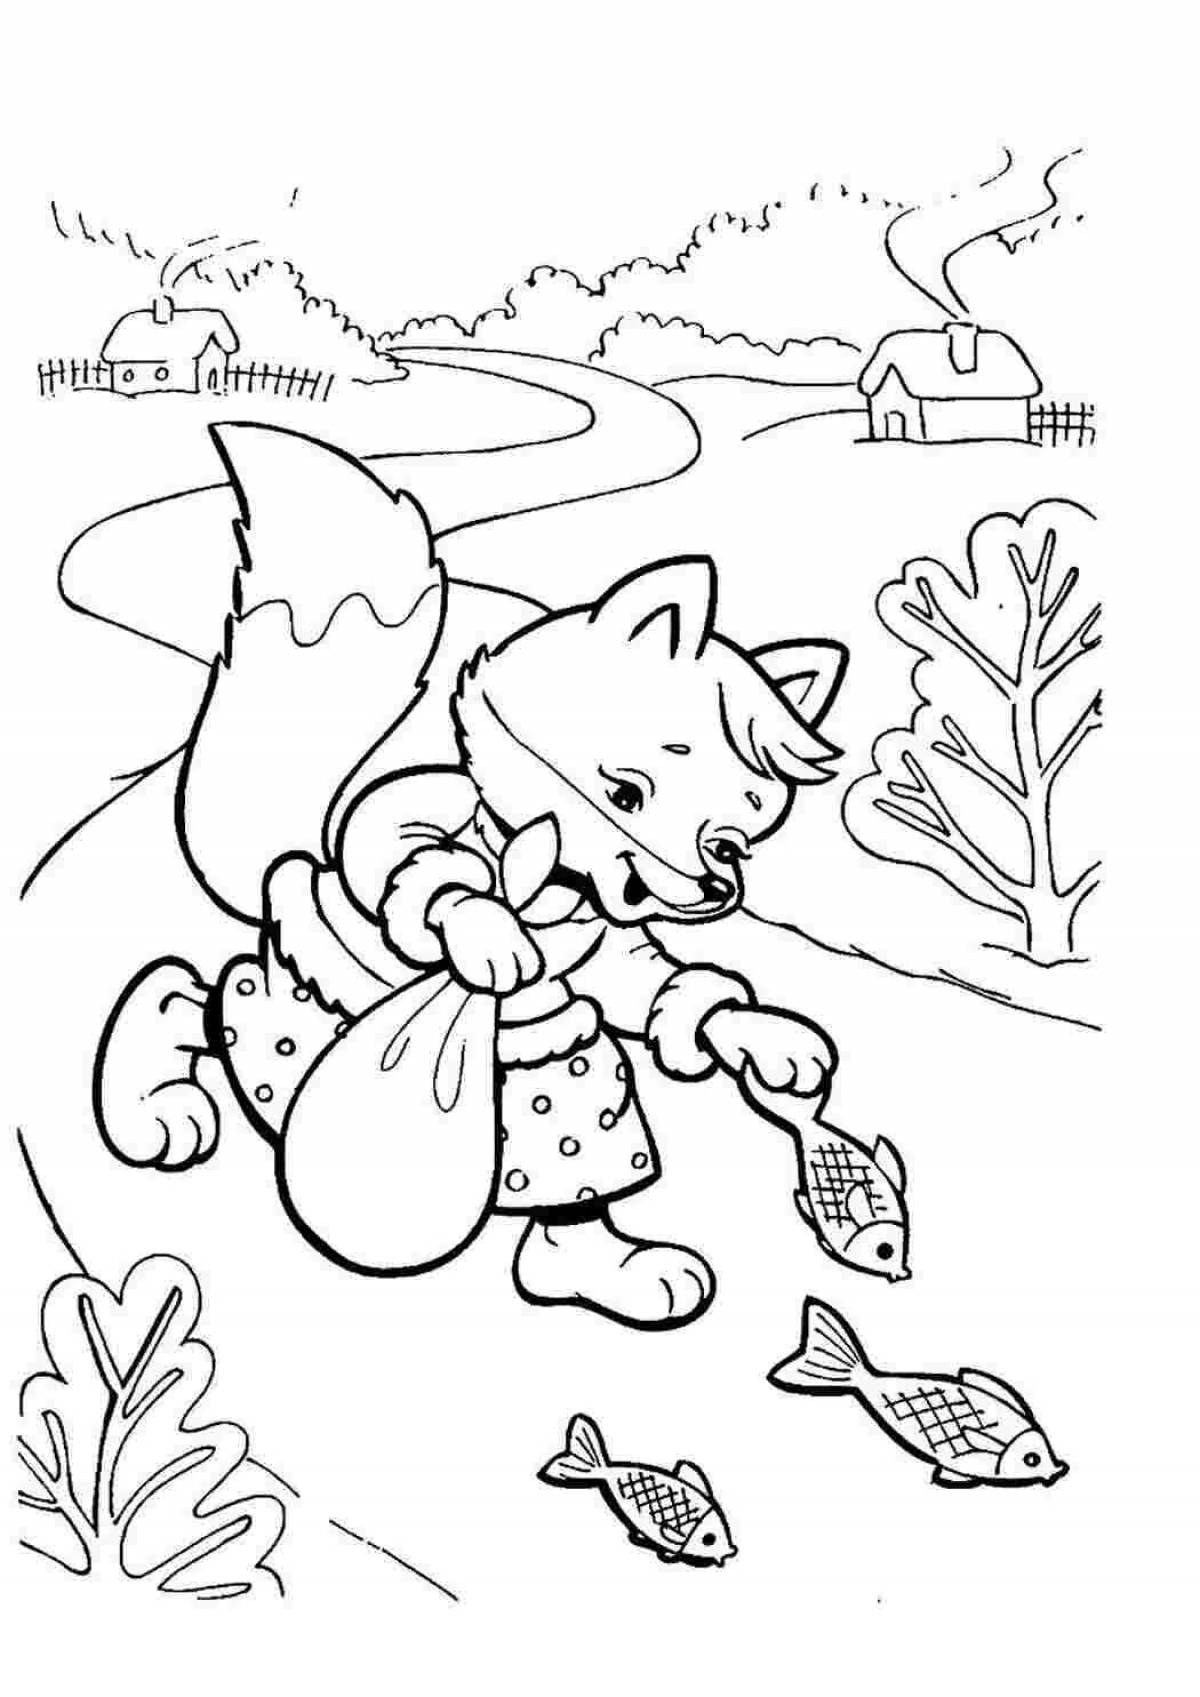 Fox and wolf for kids #10